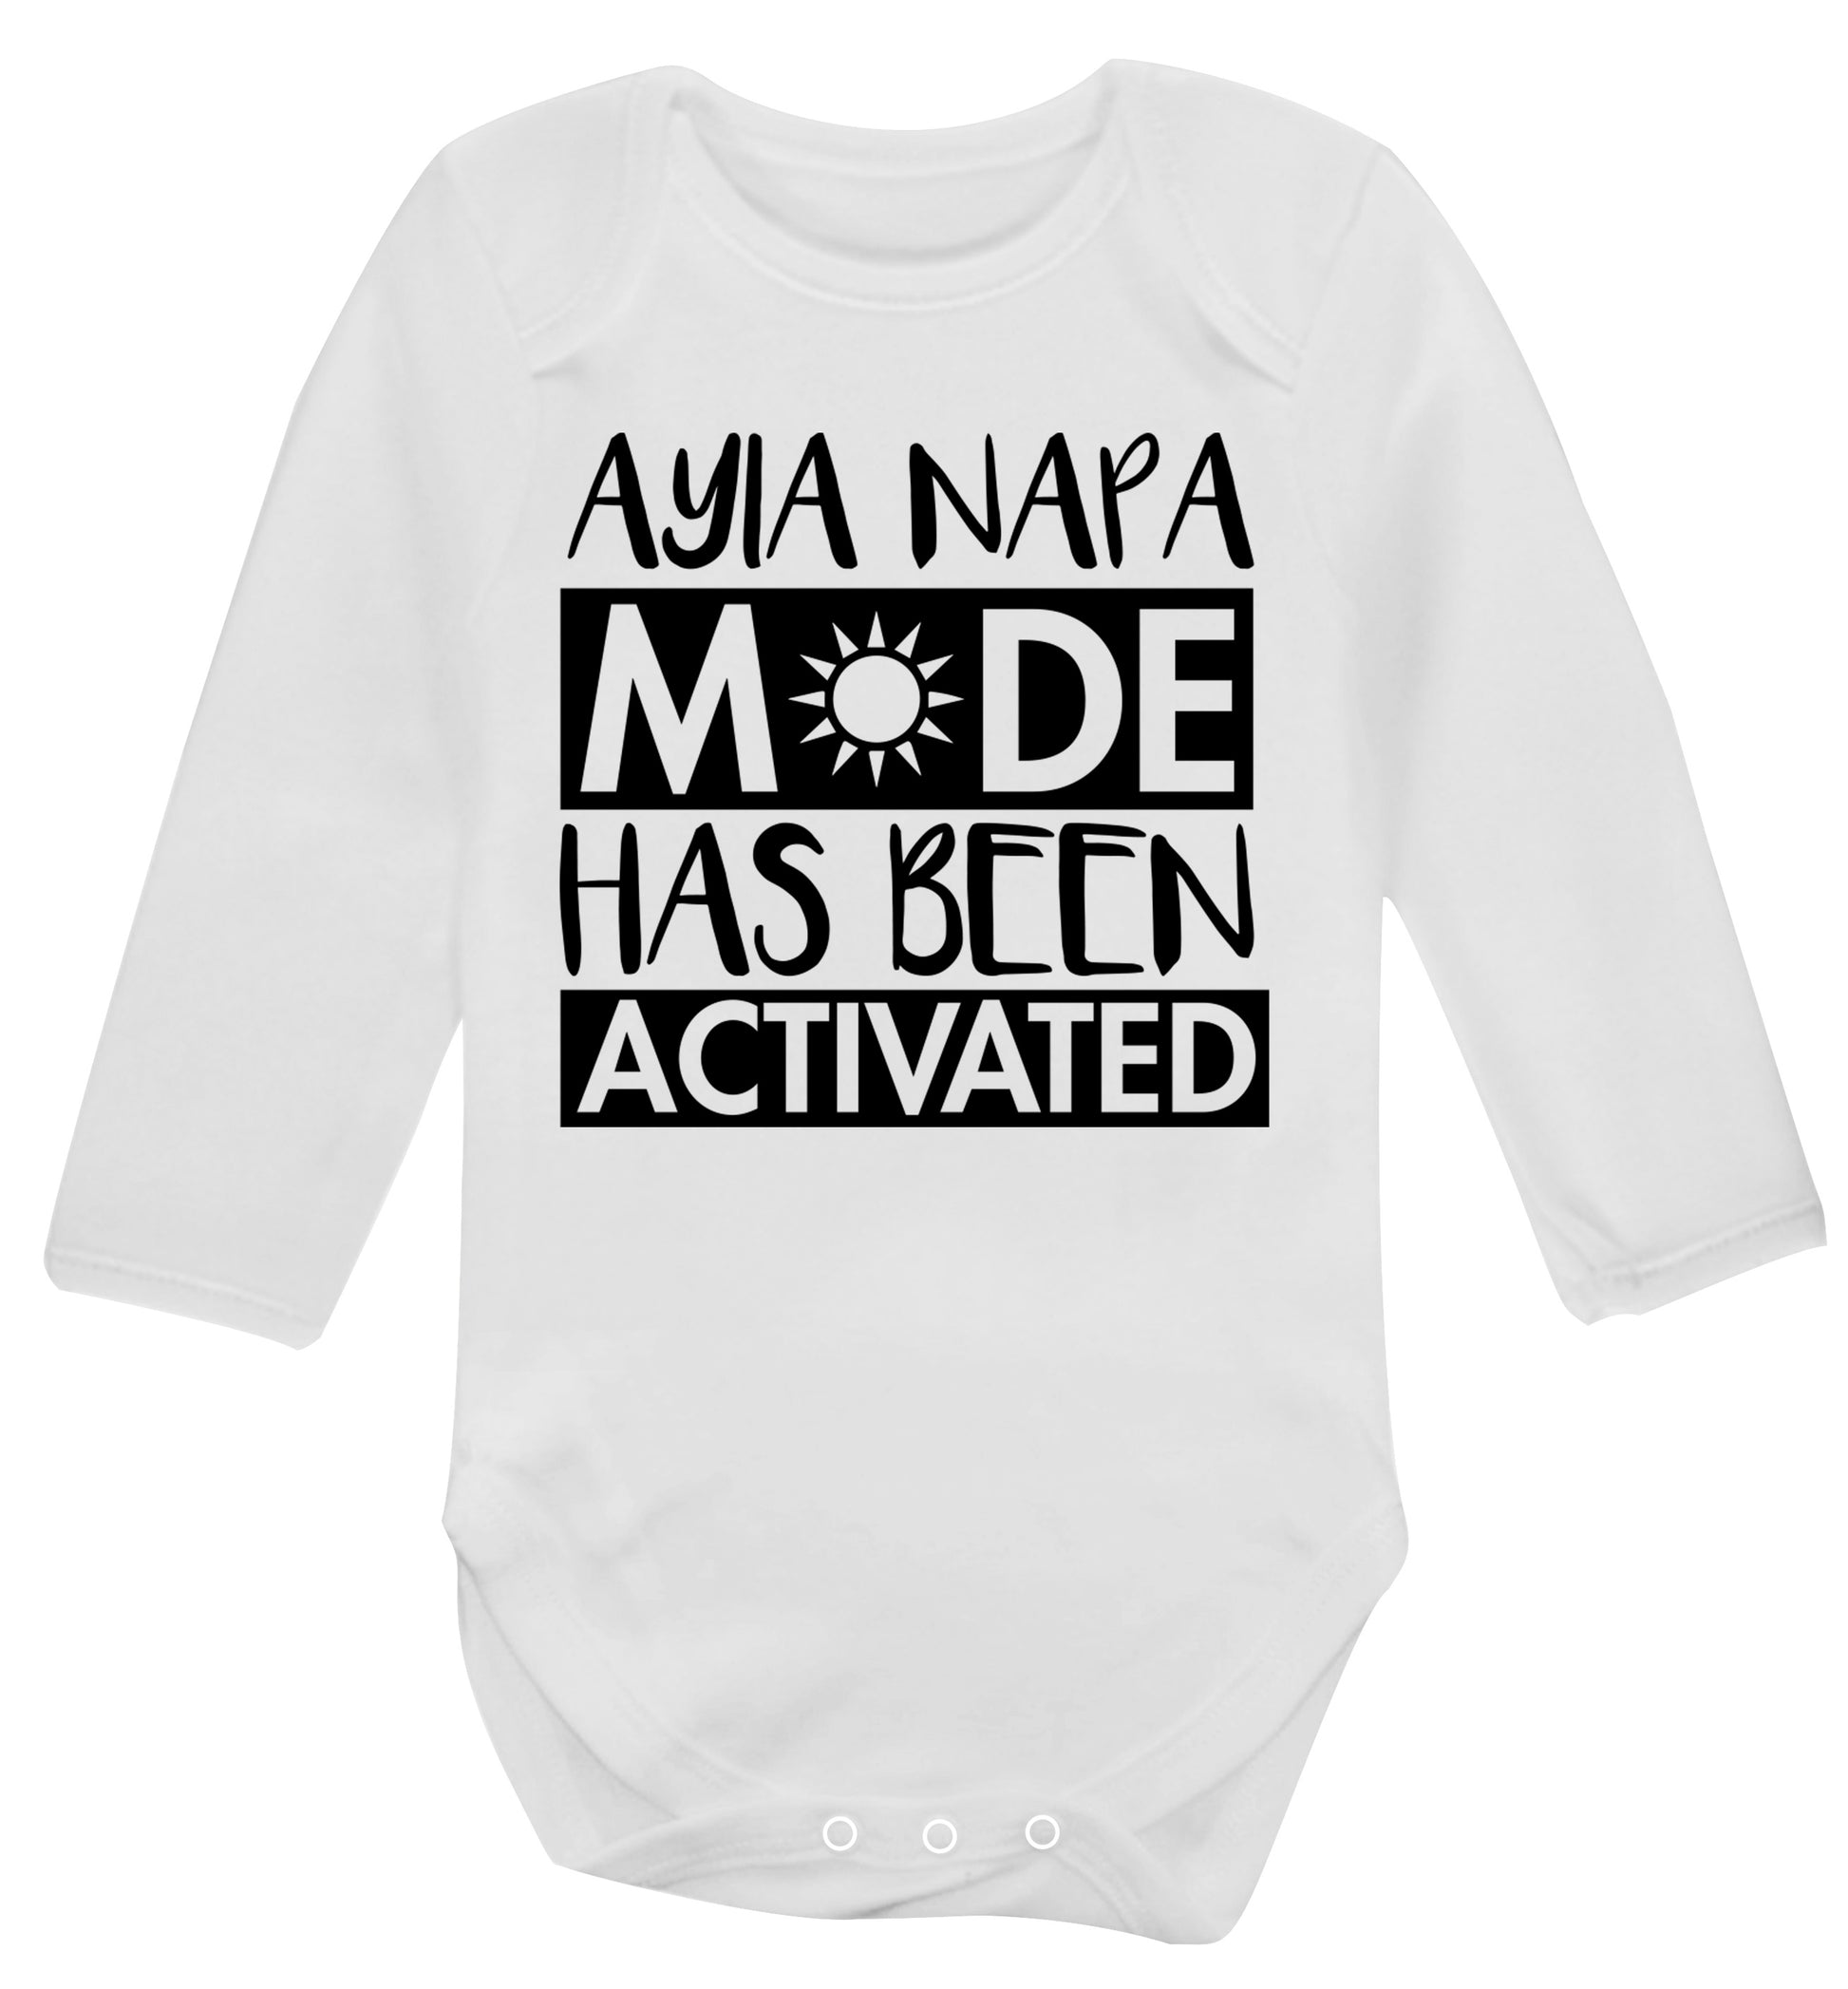 Ayia Napa mode has been activated Baby Vest long sleeved white 6-12 months